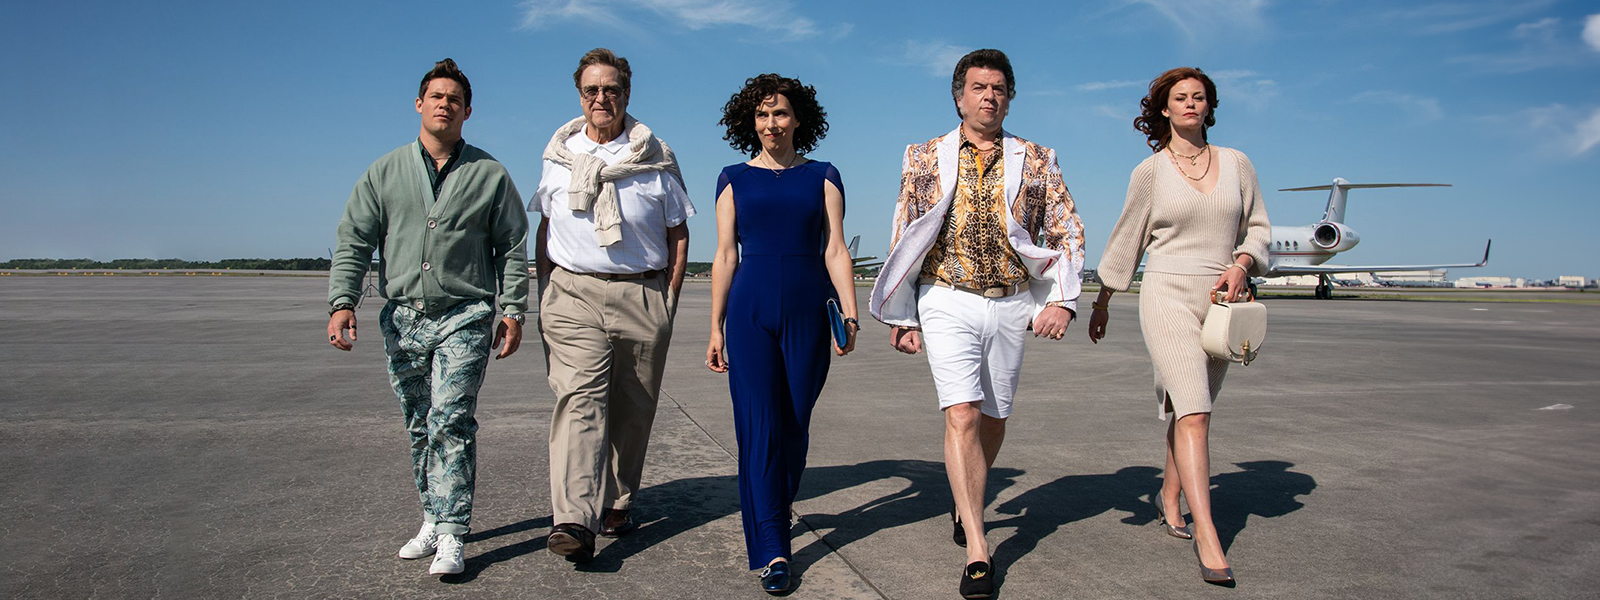 See the work of Danny McBride, David Gordon Green and many other alumni in "The Righteous Gemstones" on HBO Max